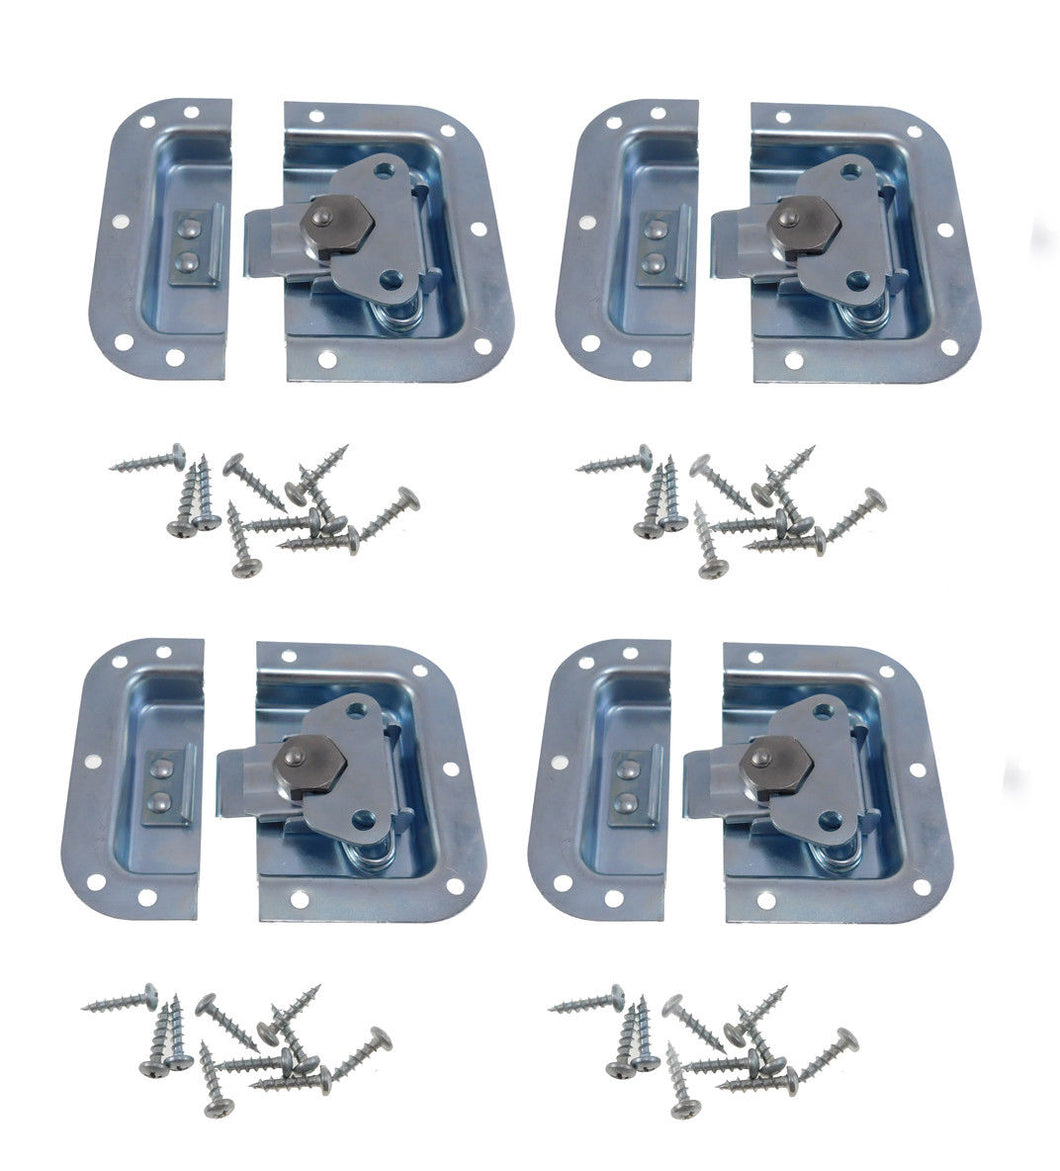 (4 PACK) RELIABLE HARDWARE A3020 Recessed Butterfly Latch for Racks/Cases - ZINC